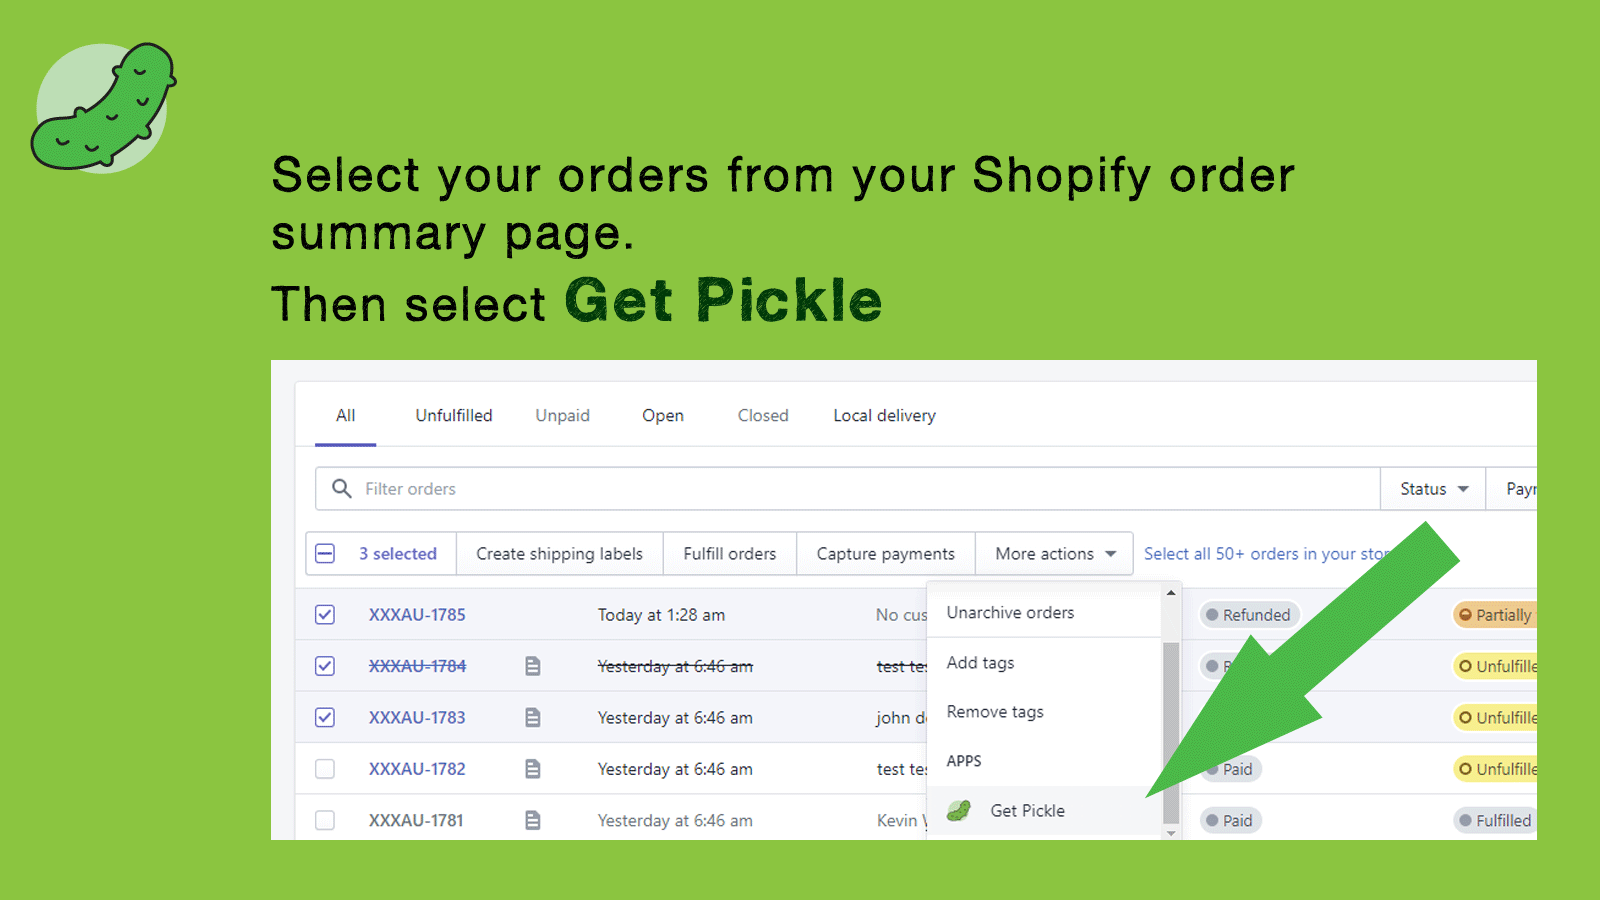 Select orders from your Shopify orders summary